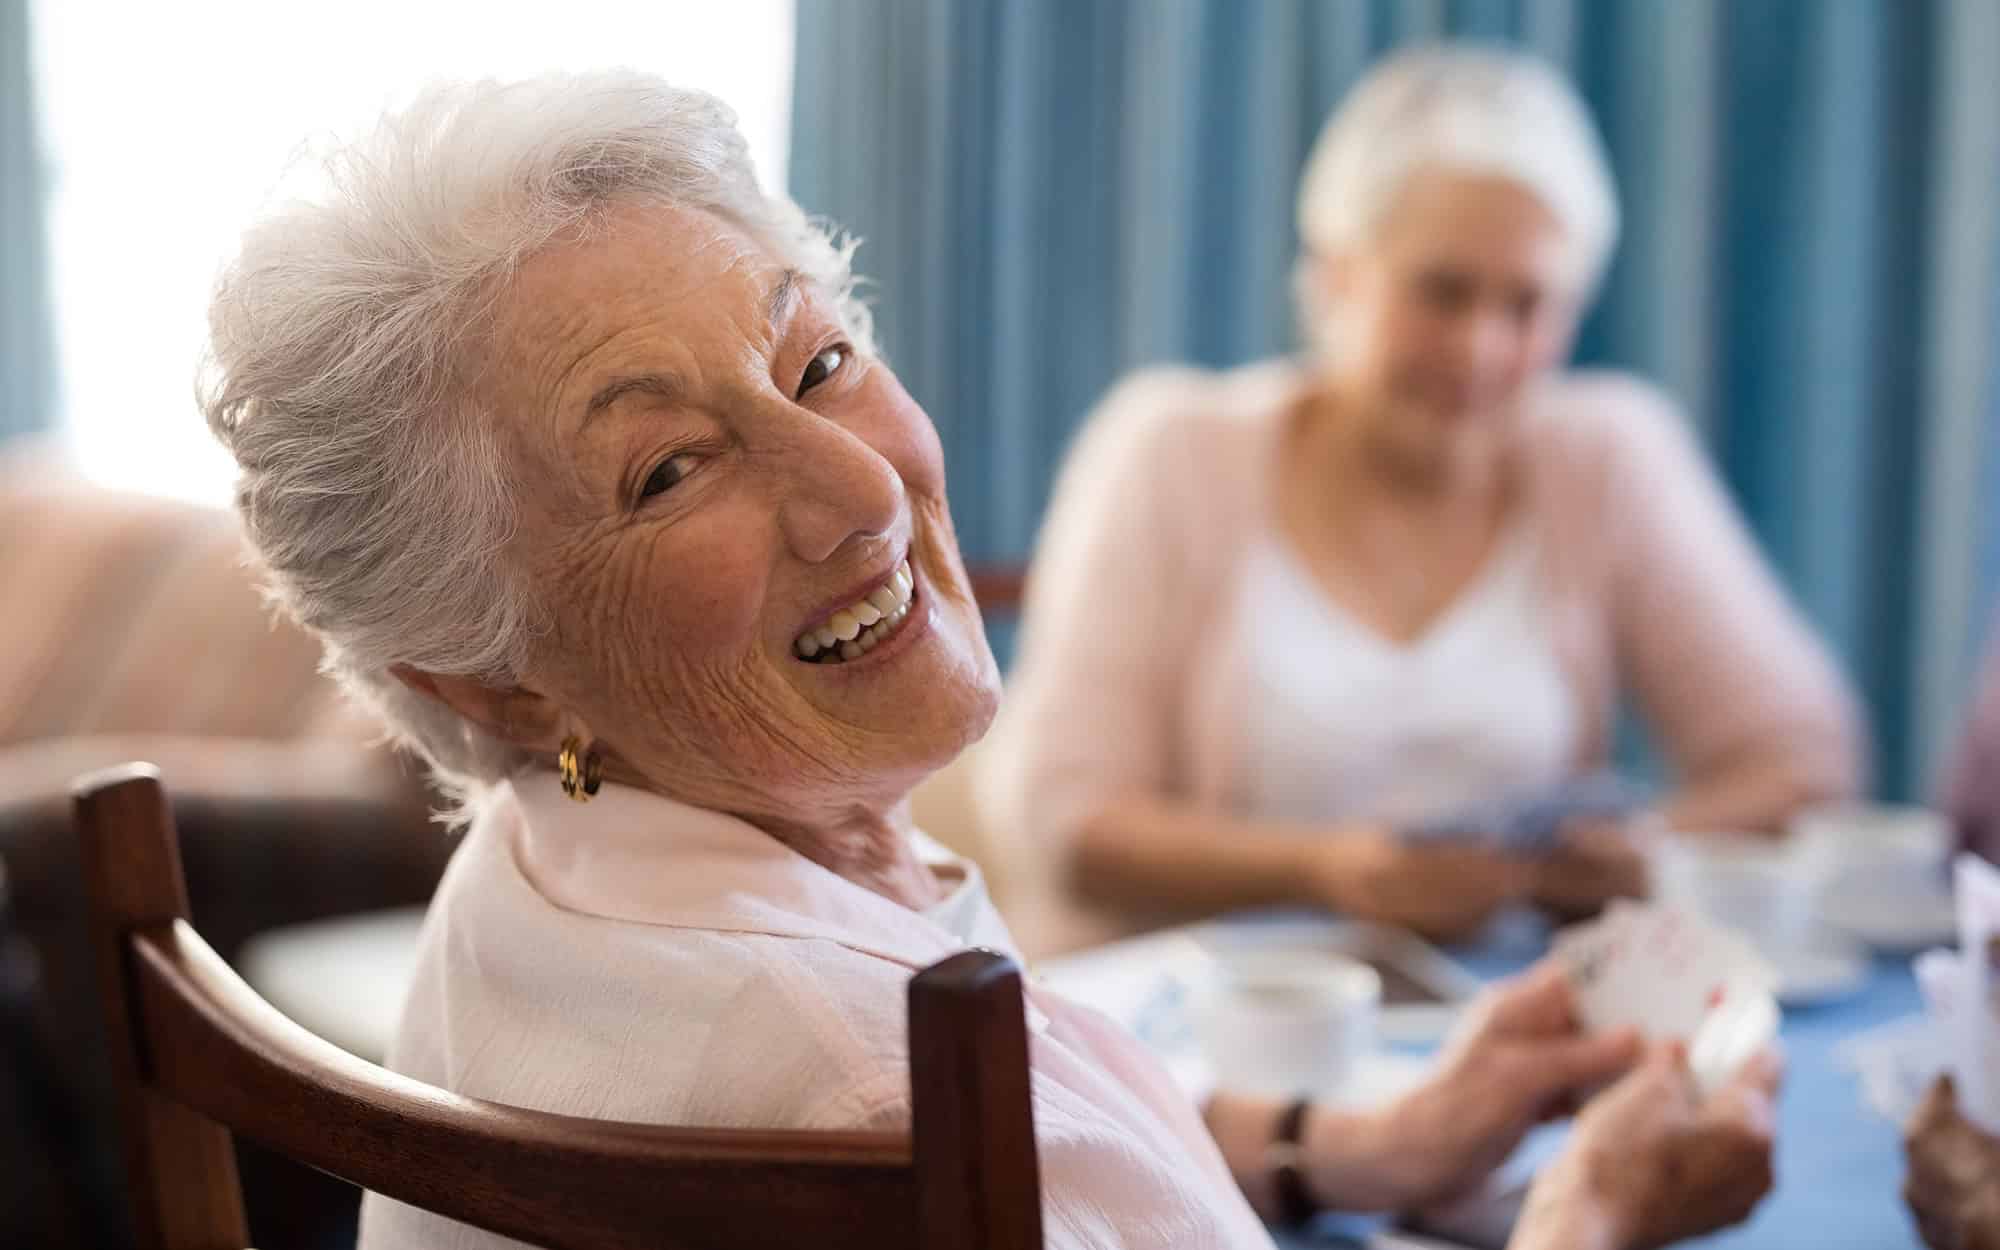 Smiling senior woman playing cards with friends